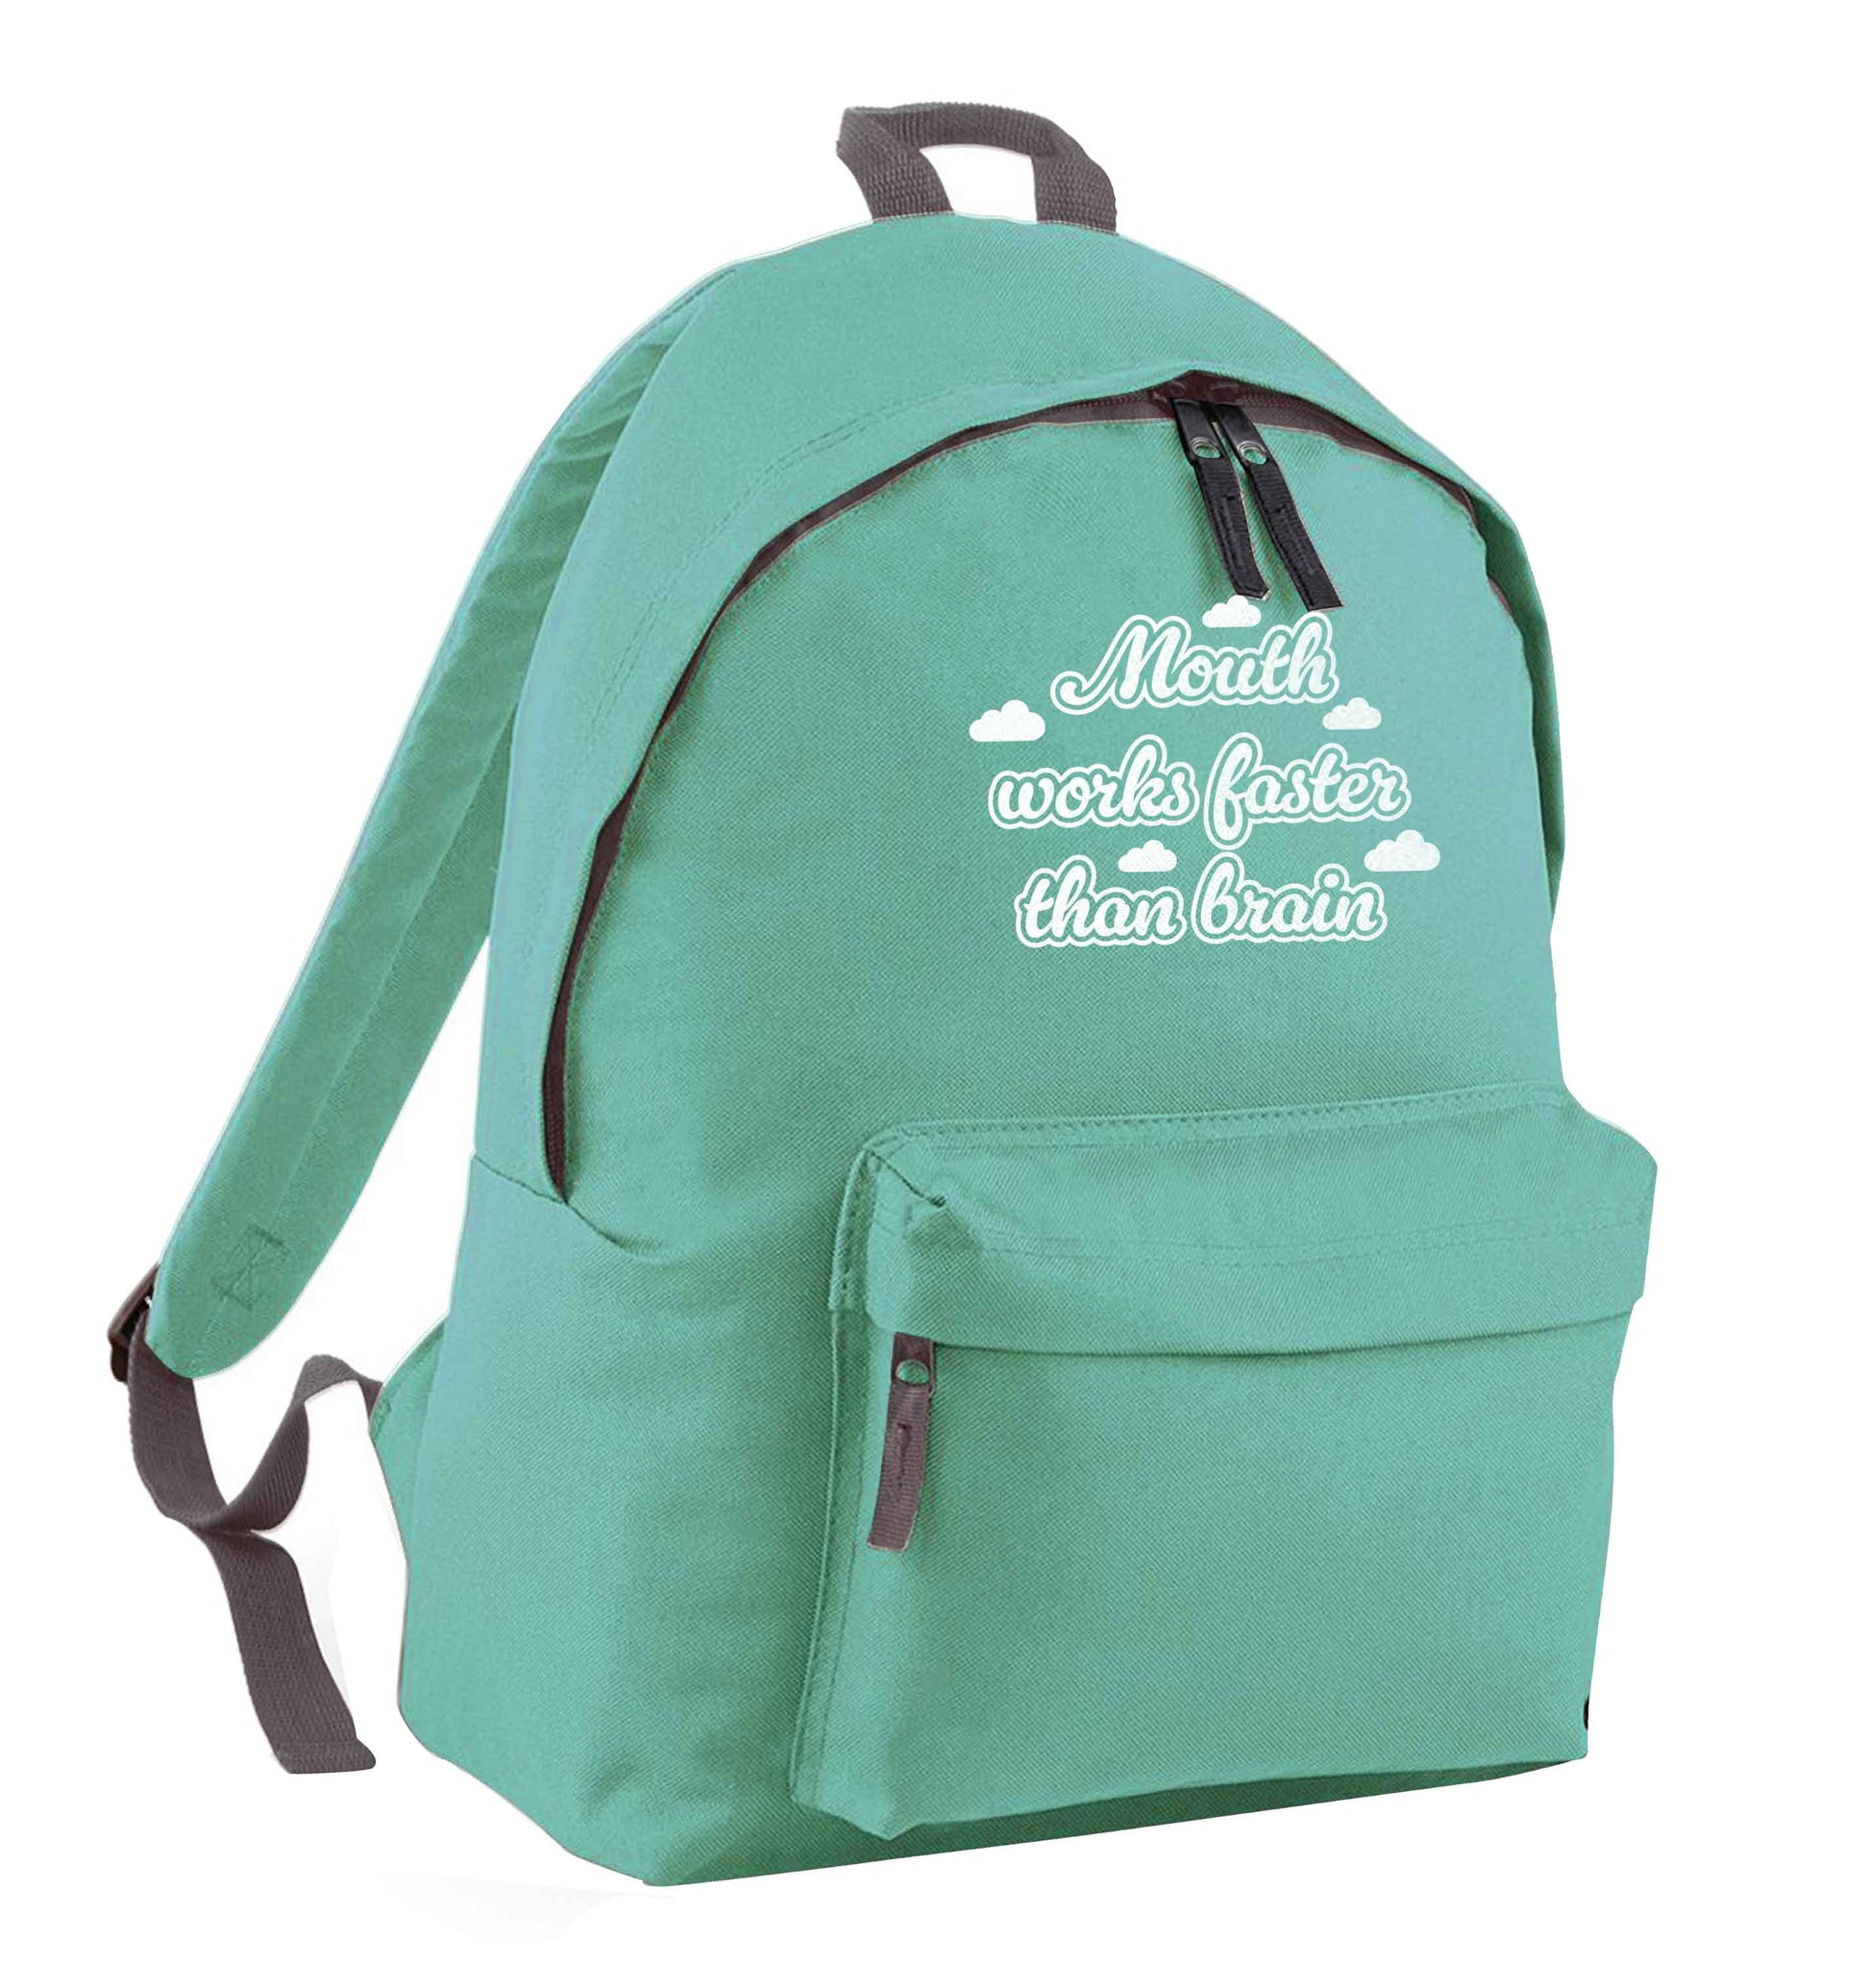 Mouth works faster than brain mint adults backpack